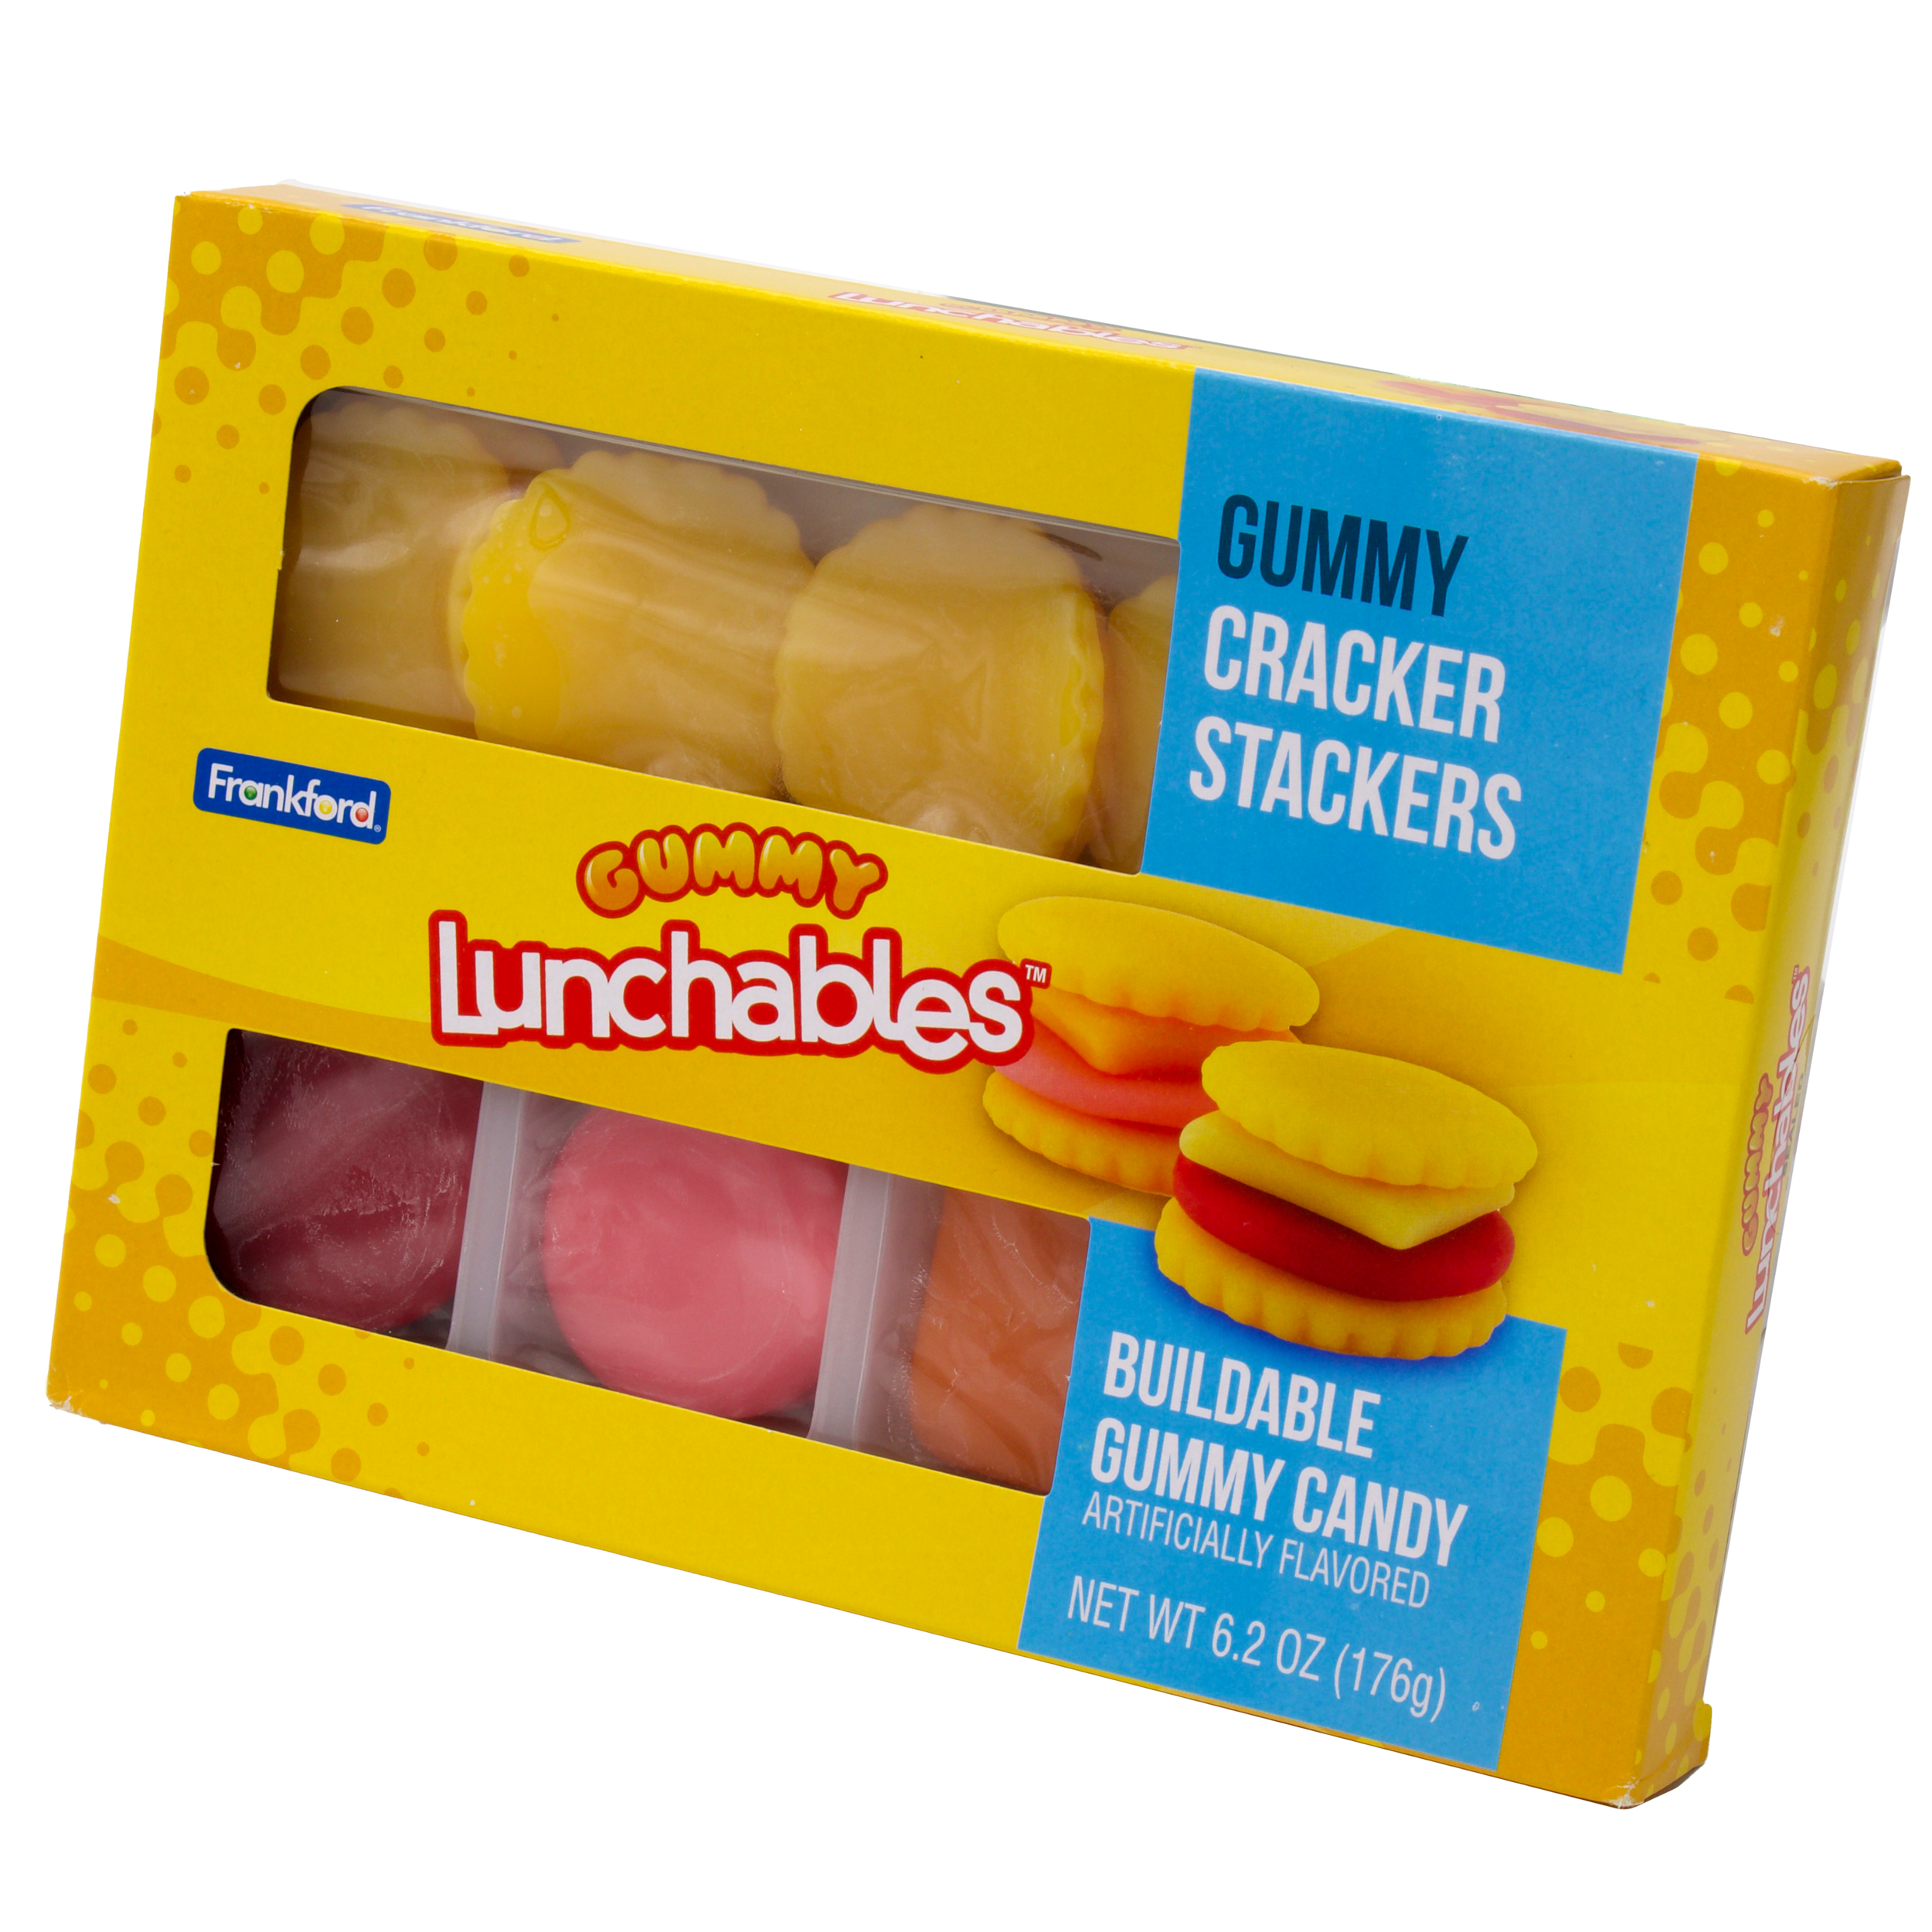 Frankford Kraft Lunchables Cracker Stacker Gummy Candy, Snack Pack 6.2 Ounces - image 4 of 6